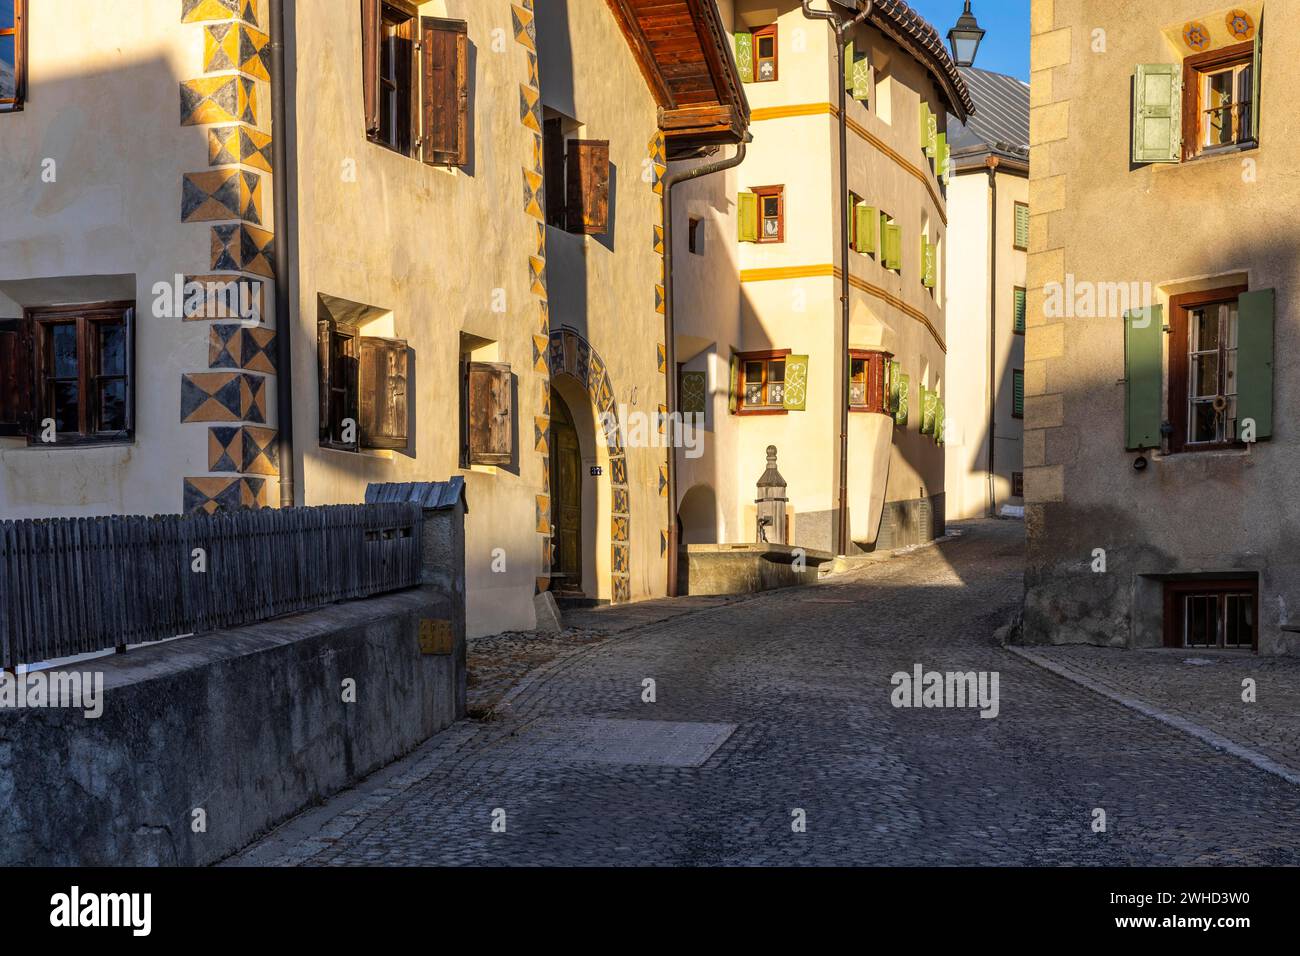 Historic houses, sgraffito, facade decorations, historic town, Guarda, Engadin, Grisons, Switzerland Stock Photo